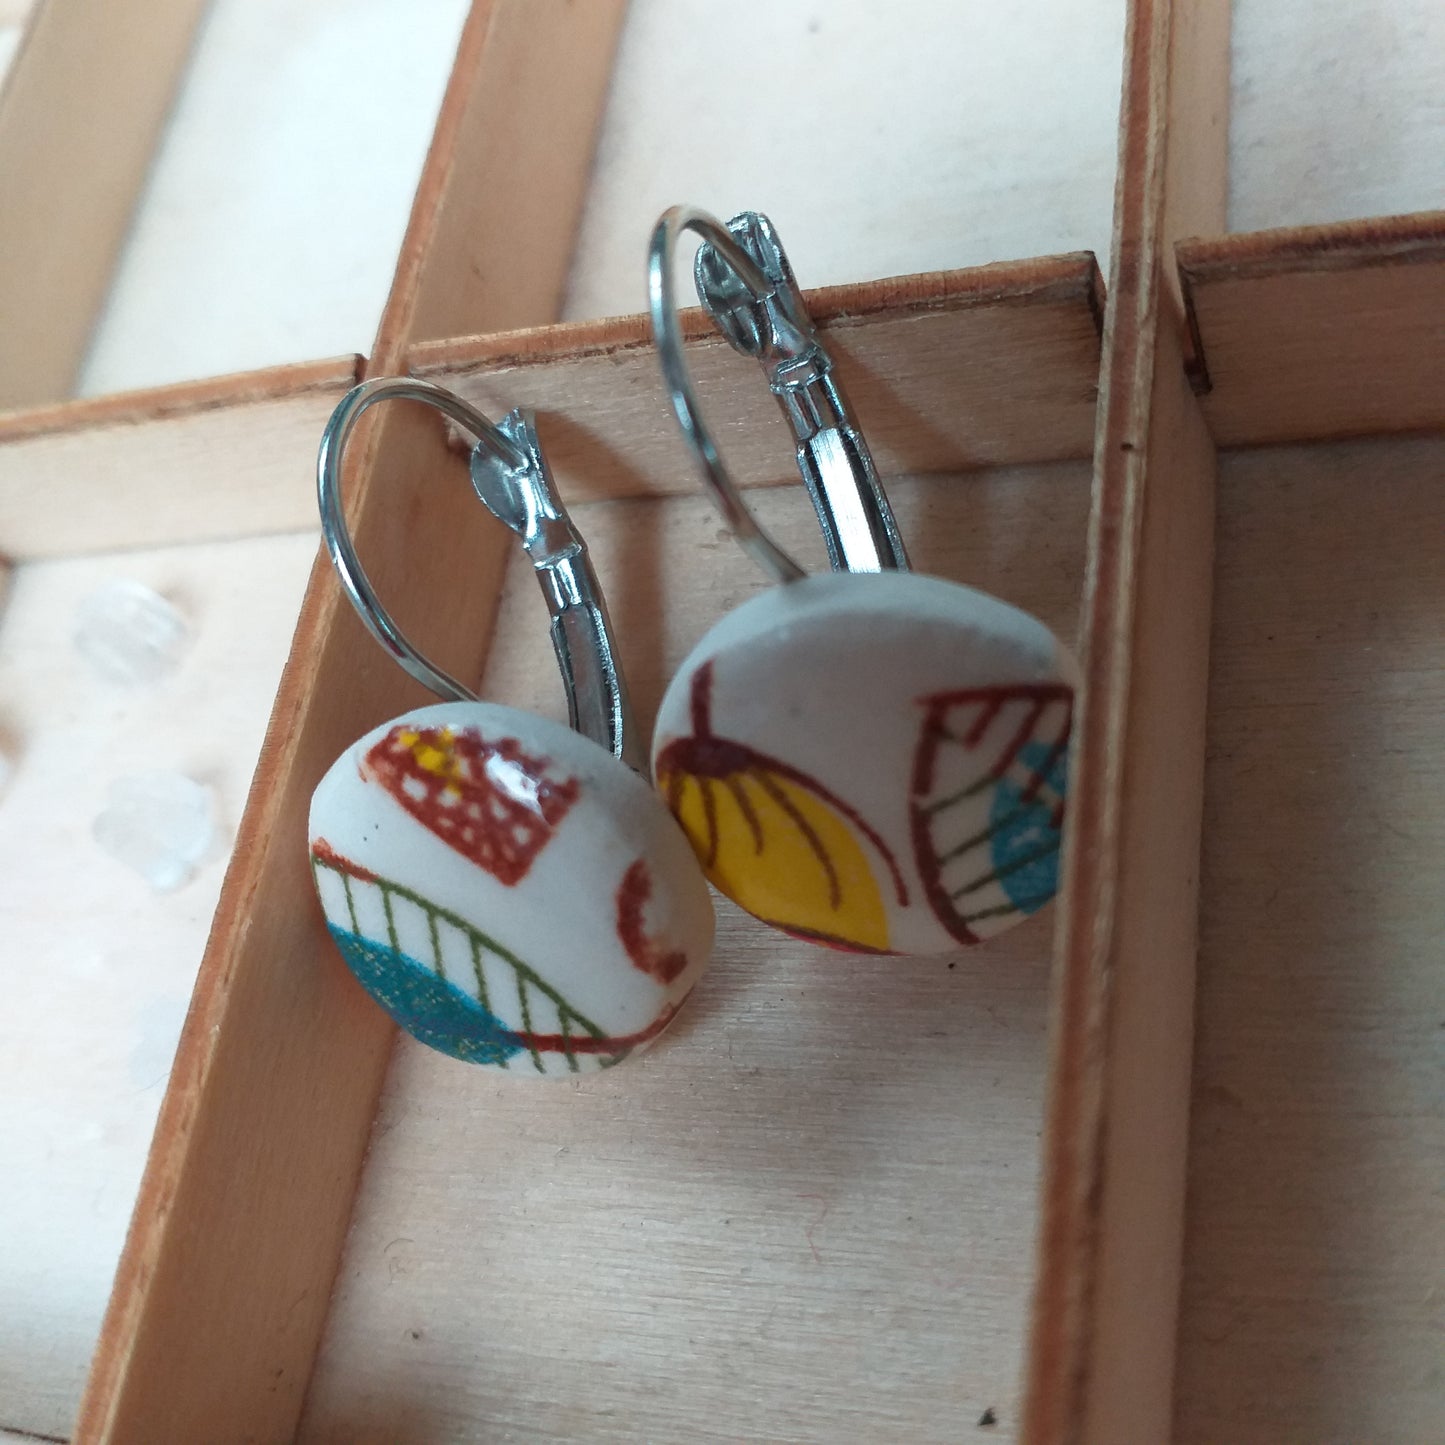 Earrings ceramic with lever back fitting.